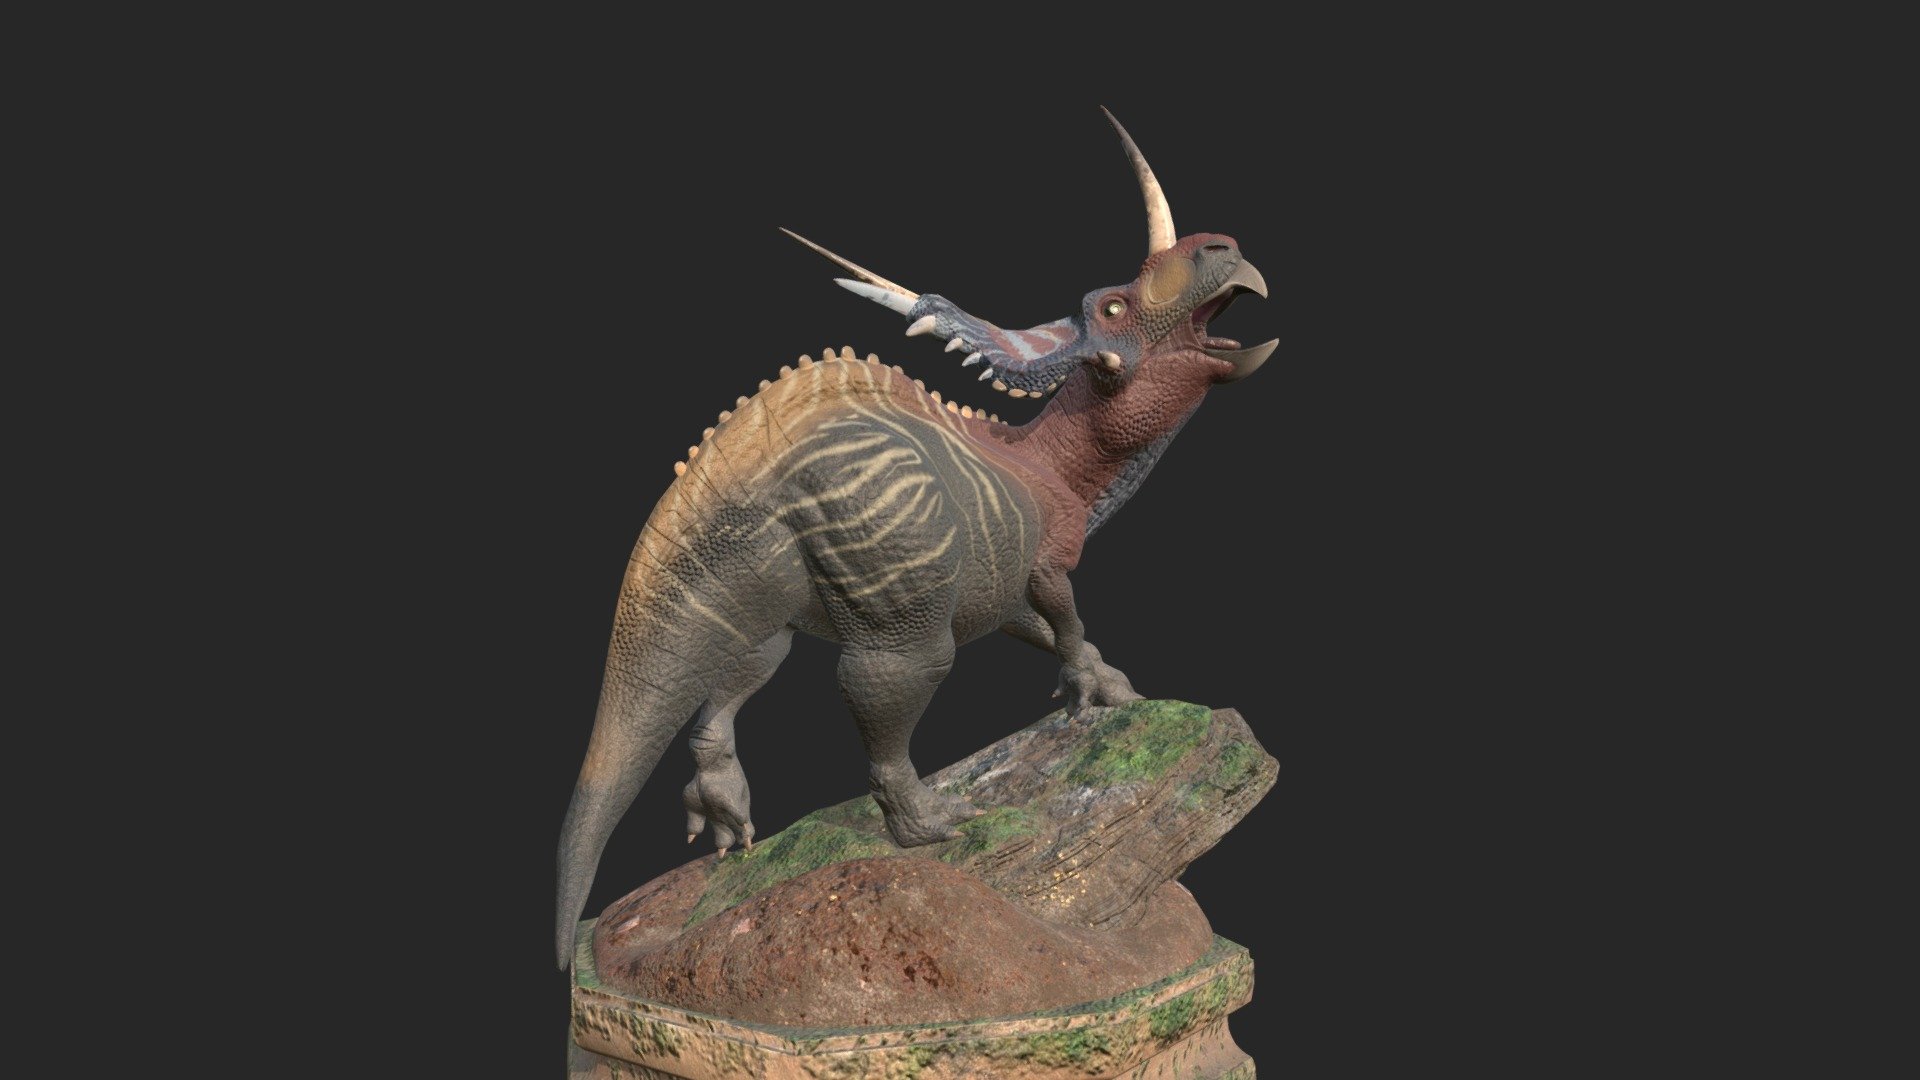 The Styracosaurus was a type of ceratopsian dinosaur from the Cretaceous Period, they lived about 75.5 to 75 million years ago.
As an adult, these dinosaurs could reach 5 feet, 9 inches in height and 18 feet in length. 
These dinosaurs could grow to weigh as much as 6000lbs! (Thats 2.3 Ford Fiestas!)

This model was originally created for a Lighting and Compositing assignment, I reworked it recently for practice and fun! - Styracosaurus - 3D model by TaylorMGandy 3d model